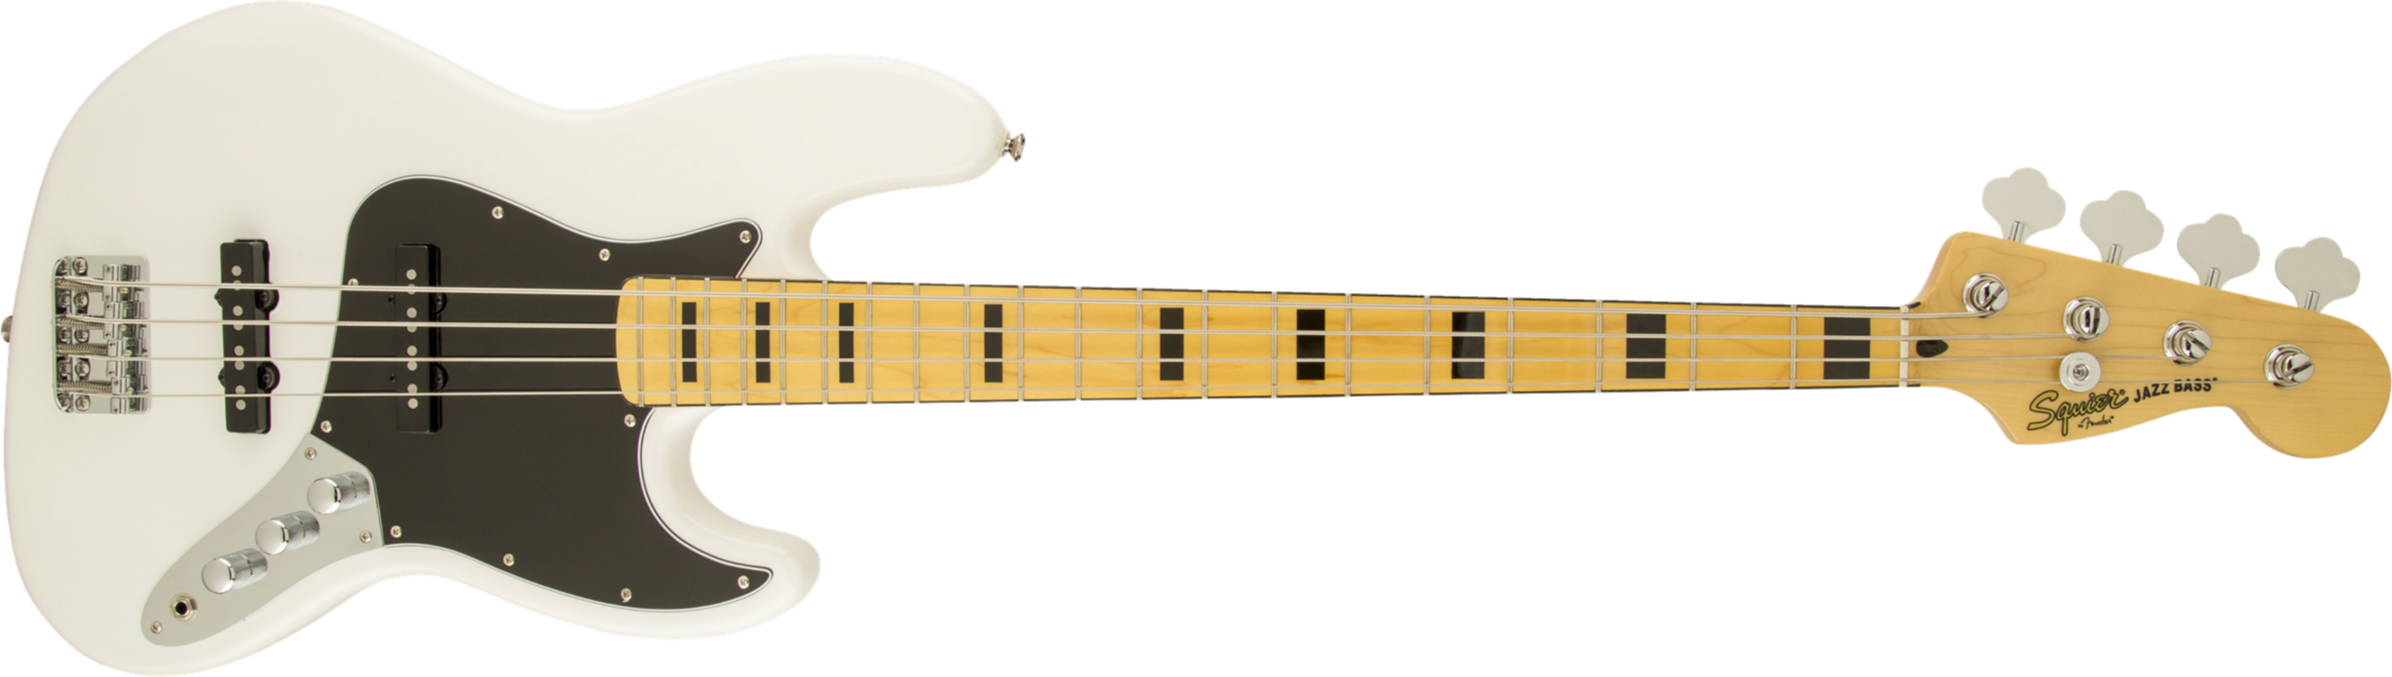 Squier Jazz Bass Vintage Modified 70 2013 Mn Olympic White - Solidbody E-bass - Main picture